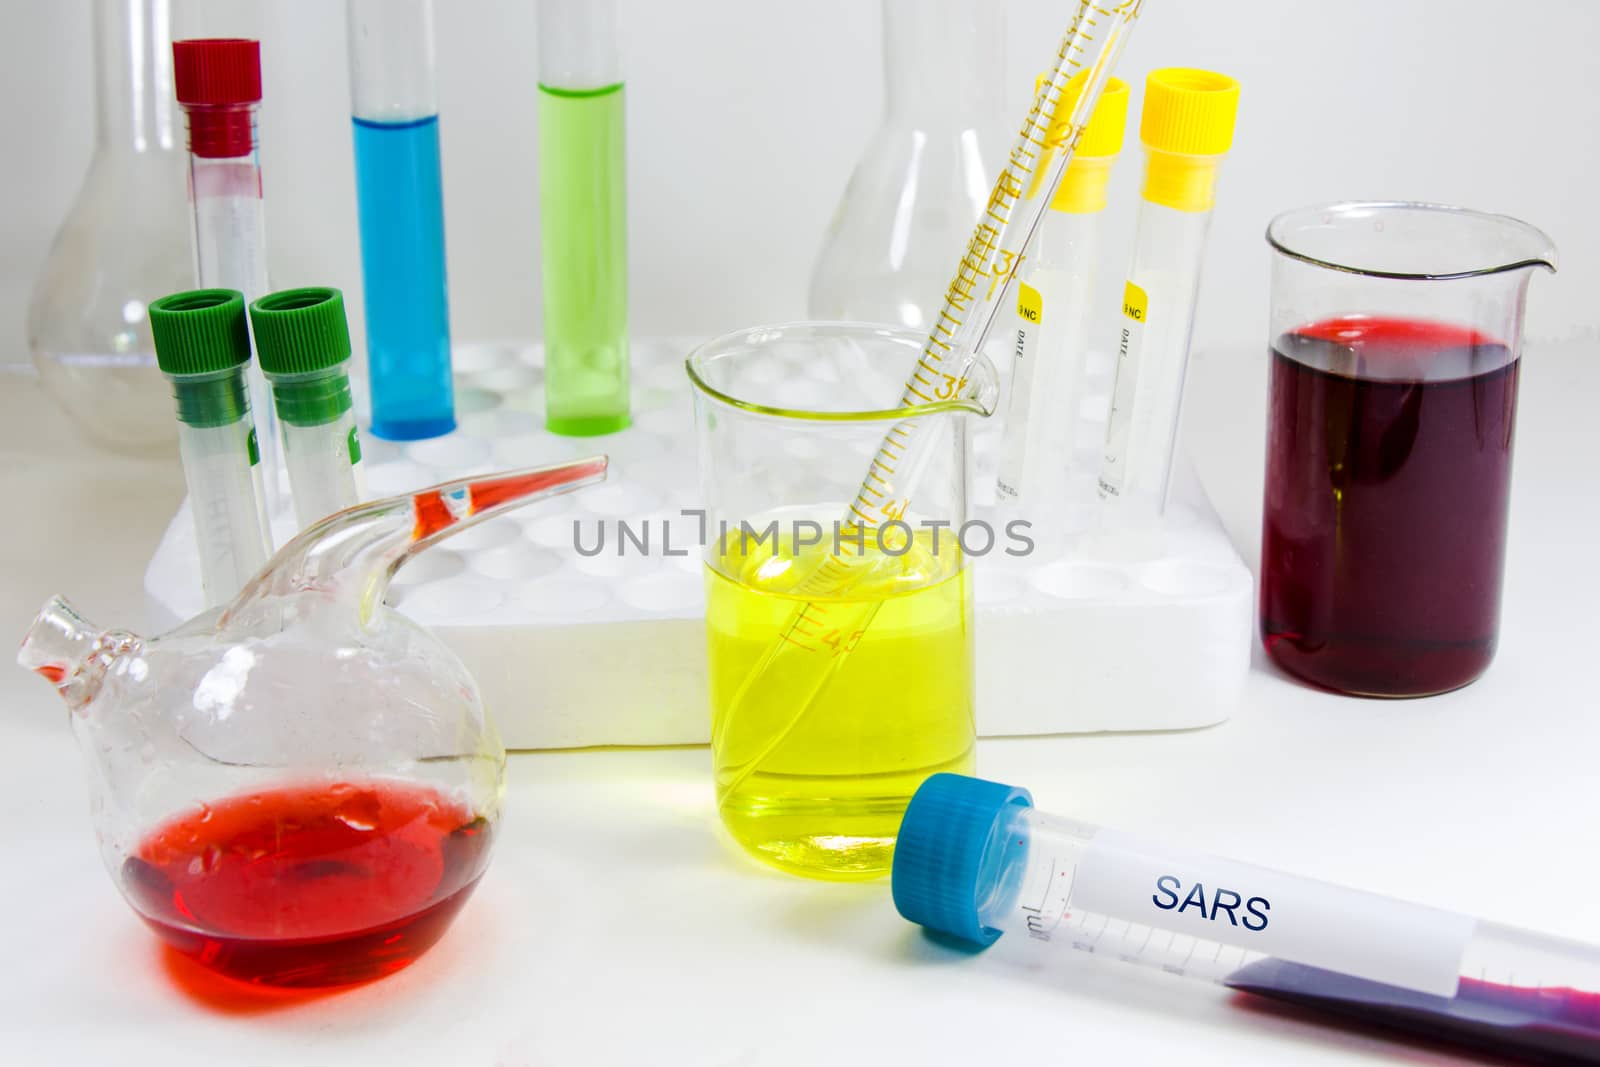 Sars viruses blood test tube and chemical elements, laboratory diagnoses, studio shoot on the white background.